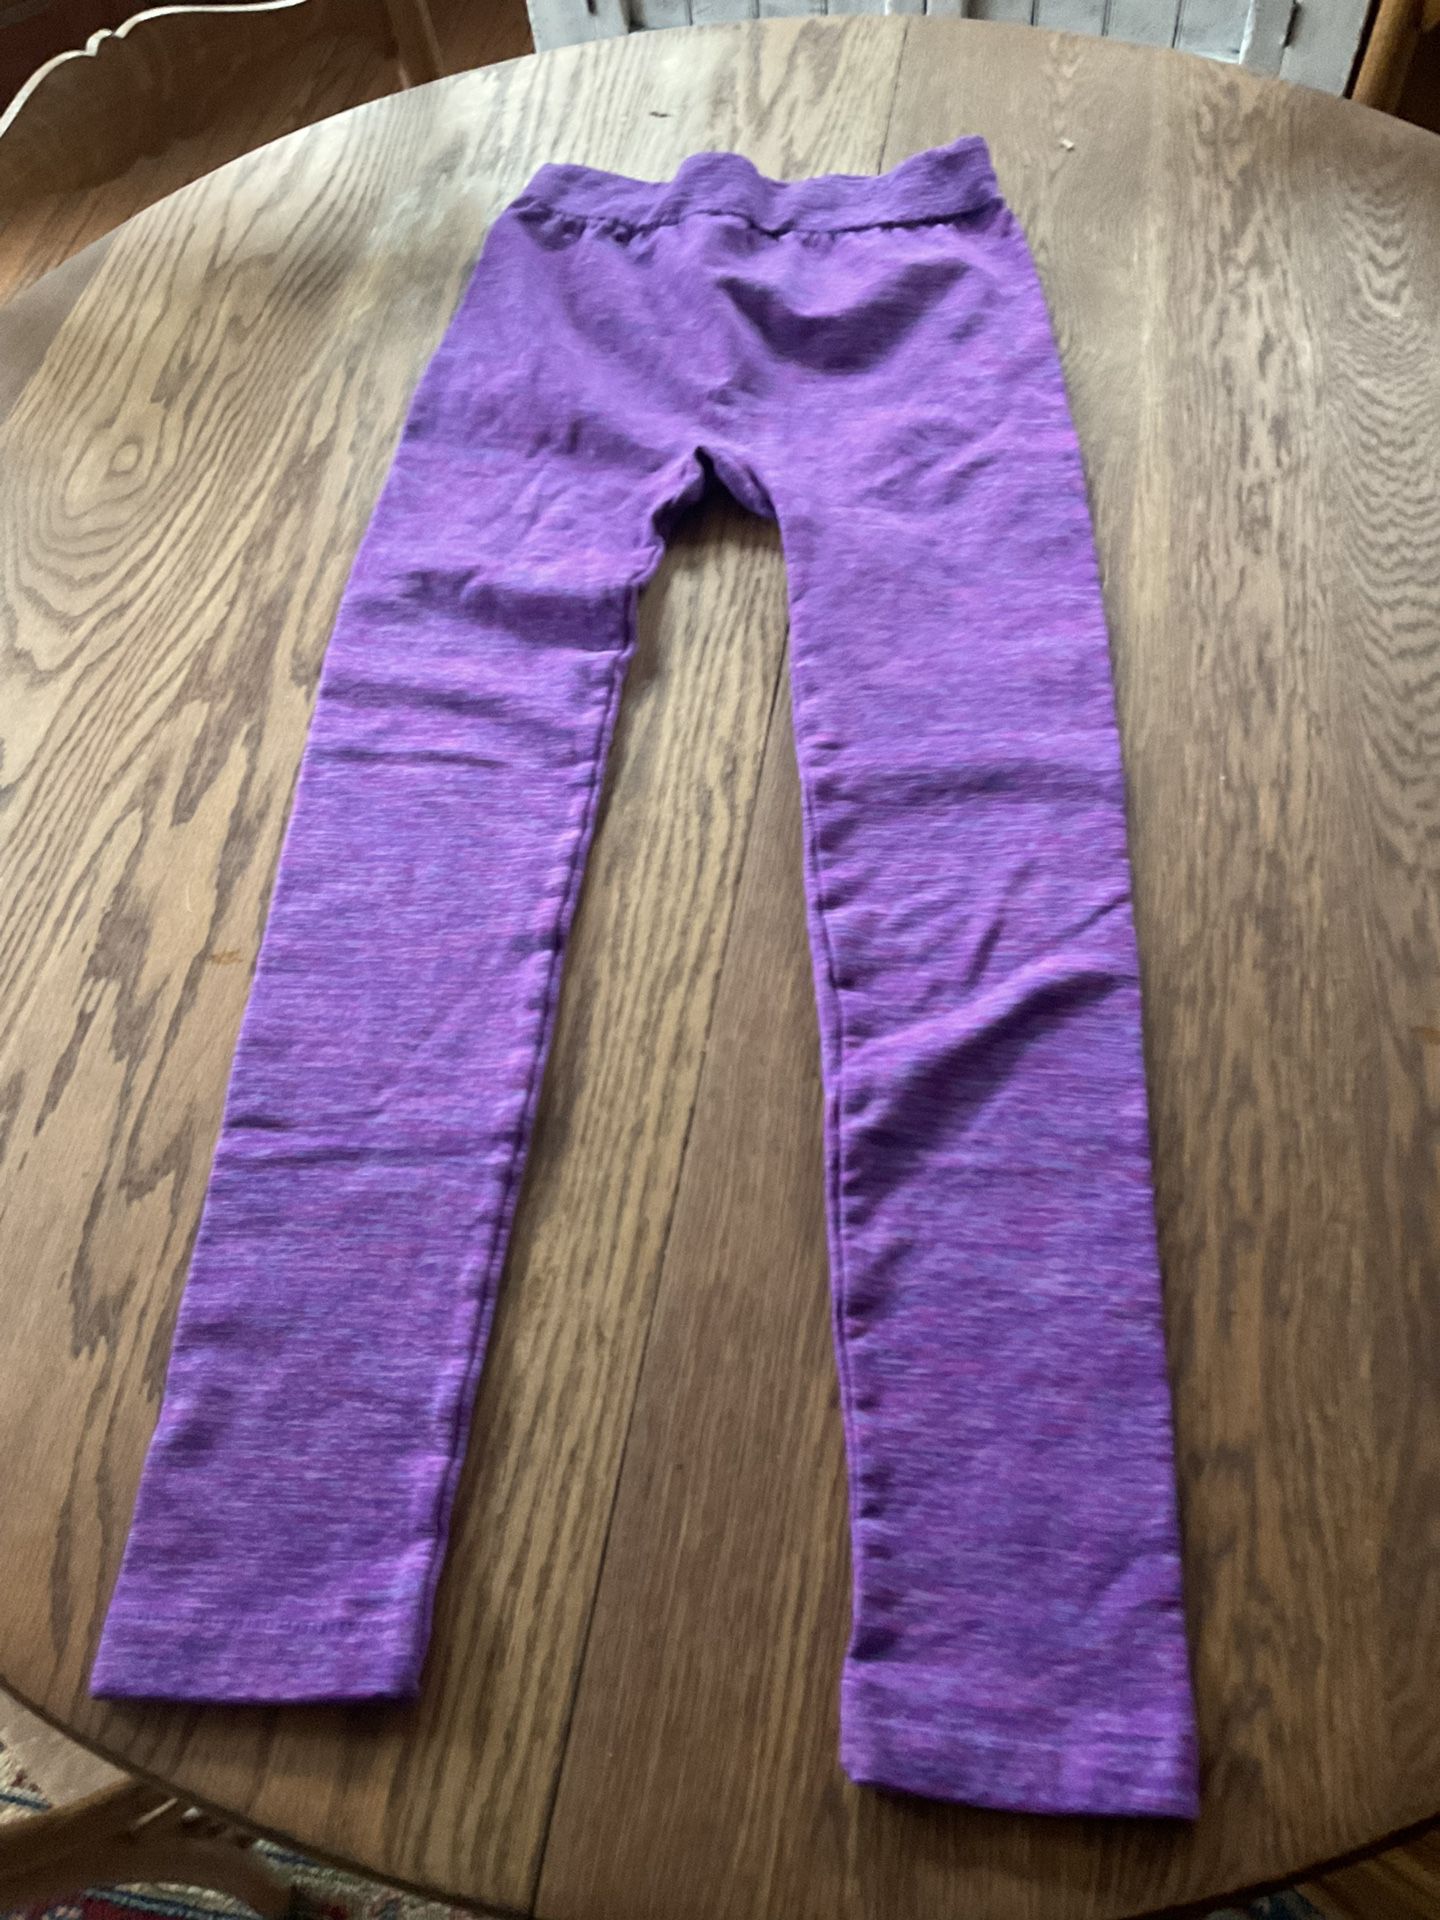 Still Available, Women’s Small Fleeced Lined Leggings. (I Accidentally Deleted Someone That Was Interested In These Leggings)please Message Me Again, 